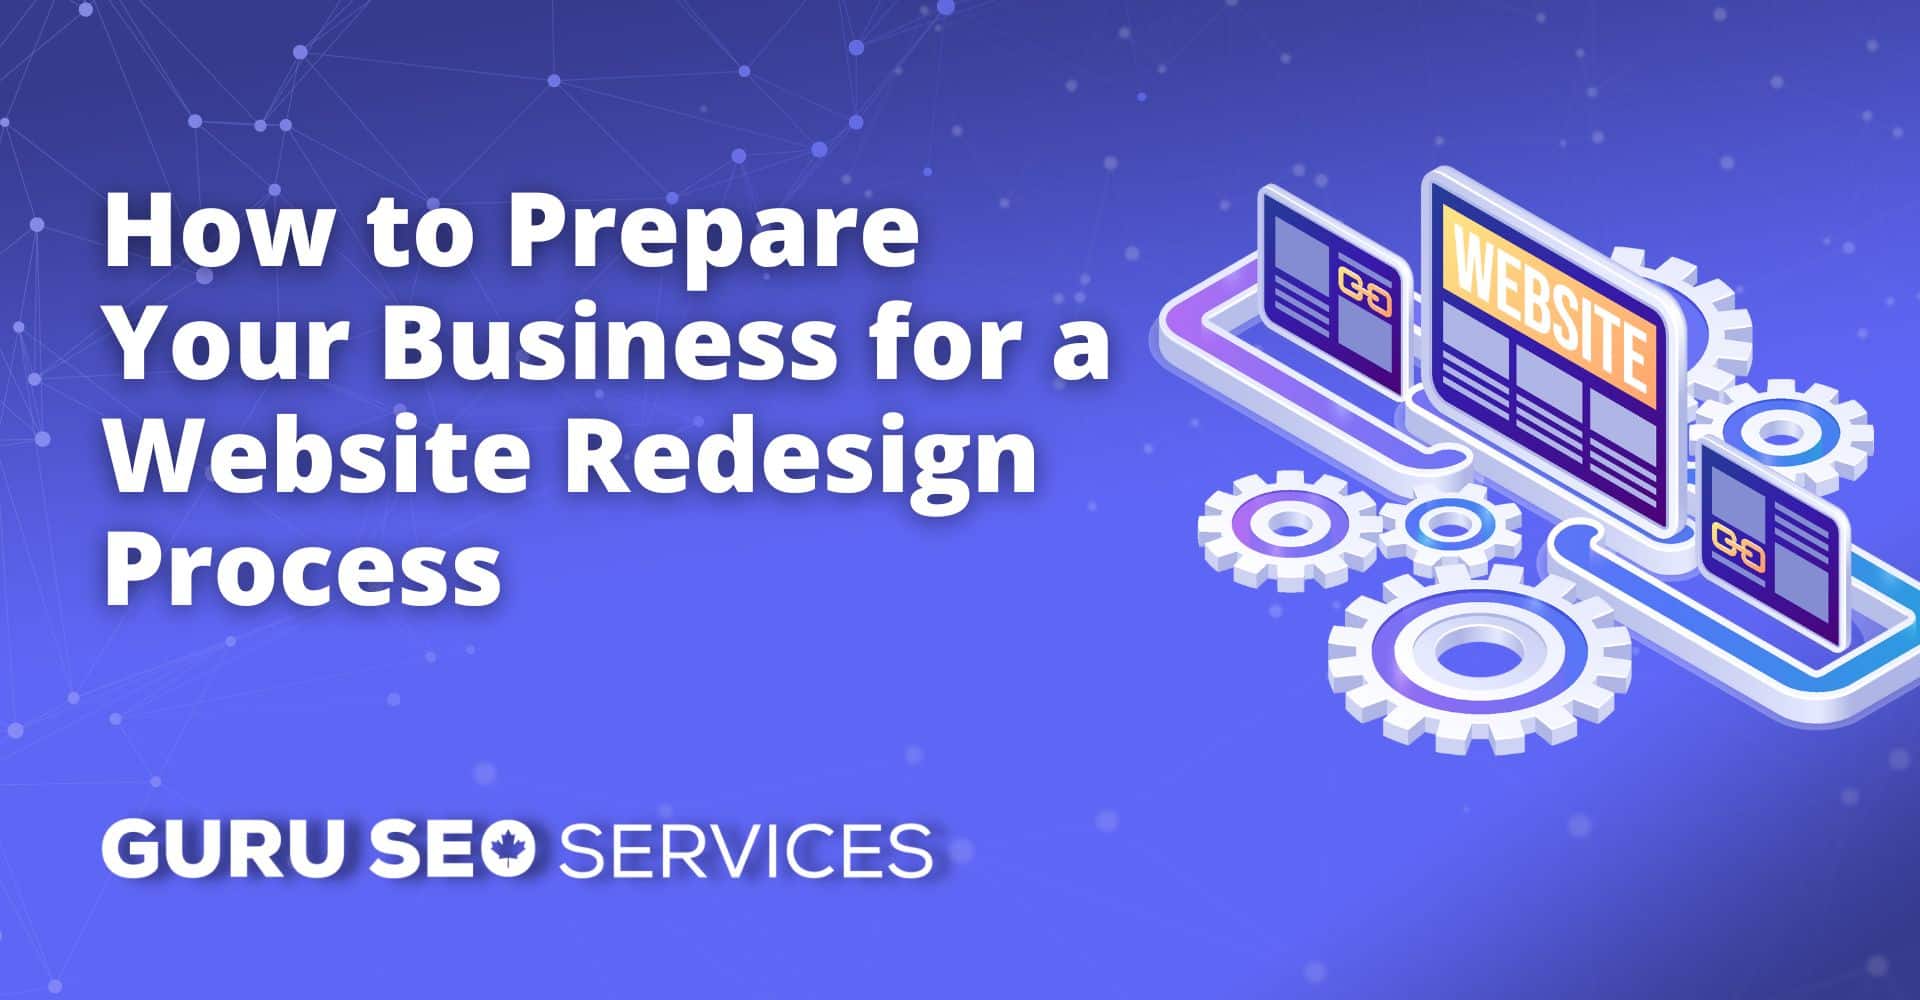 How to prepare your business for a website redesign process with proper web design and SEO services.